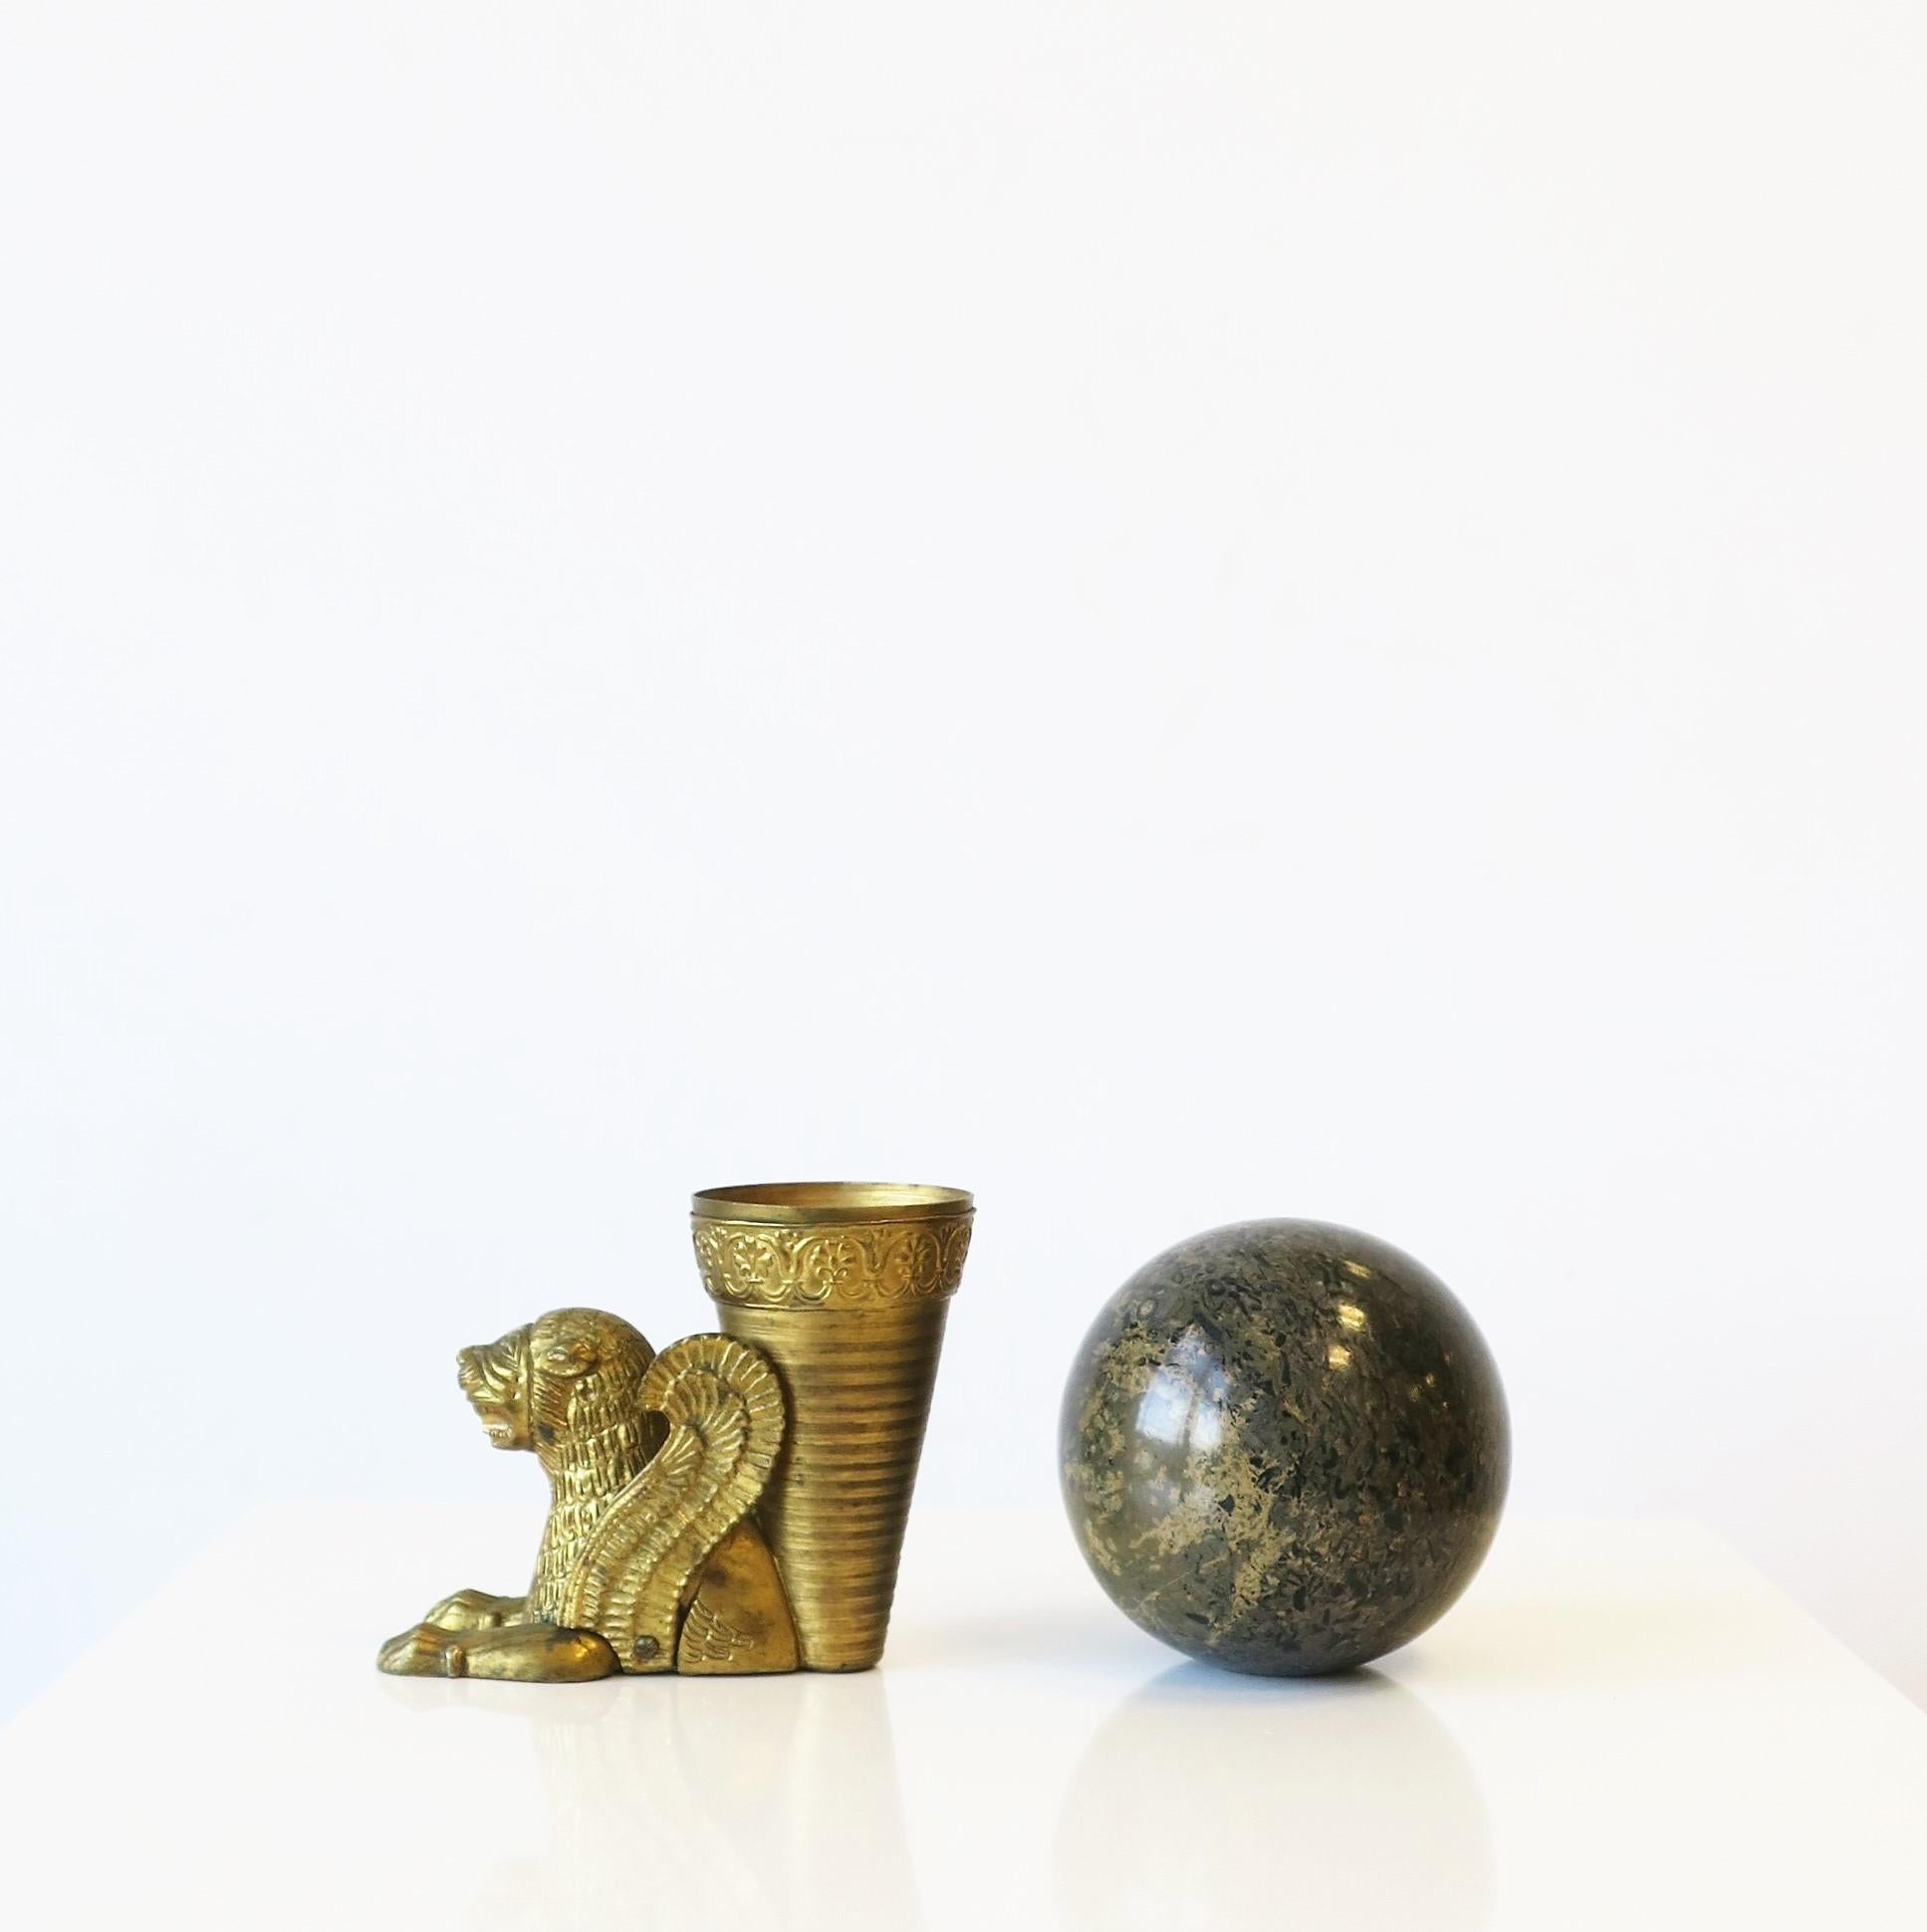 A substantial bronze gold-gilt lion vase or decorative object sculpture in the Egyptian Revival style, circa 20th century or earlier. Beautiful as a small vase with a lot of style, and also great as a standalone decorative object. Dimensions: 4.5